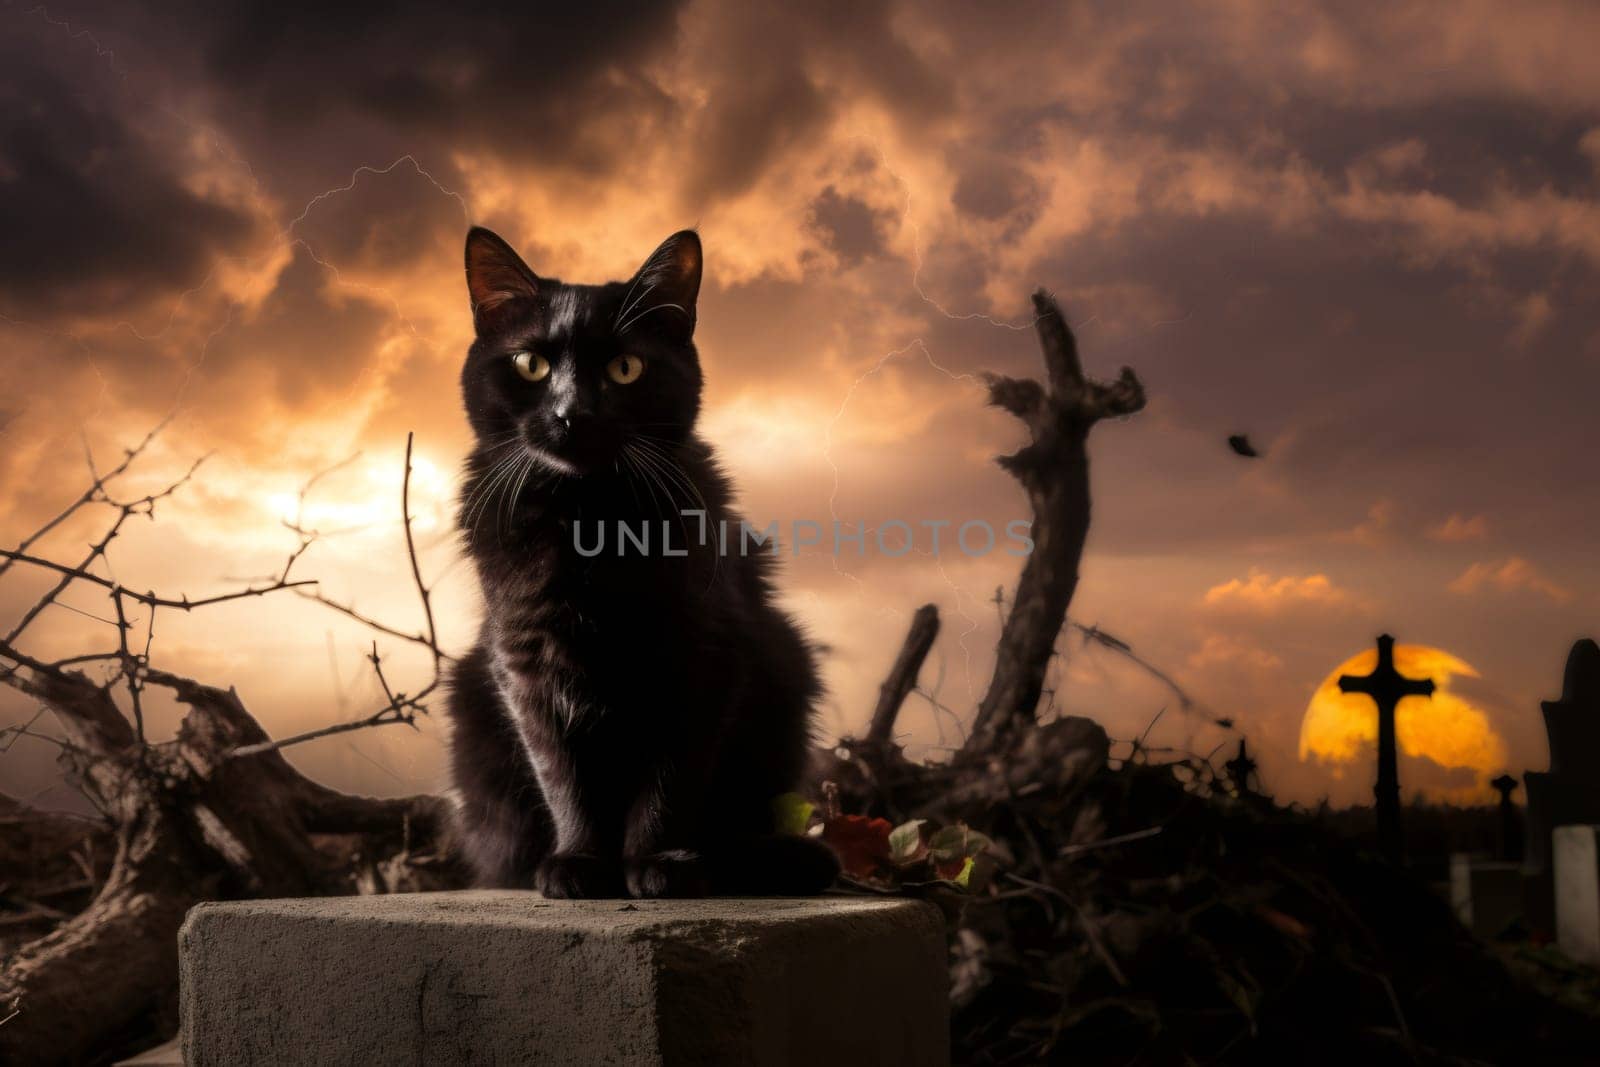 One black cat sits on a gravestone at night in a cemetery with crosses and a thunderstorm in the sky, close-up view.